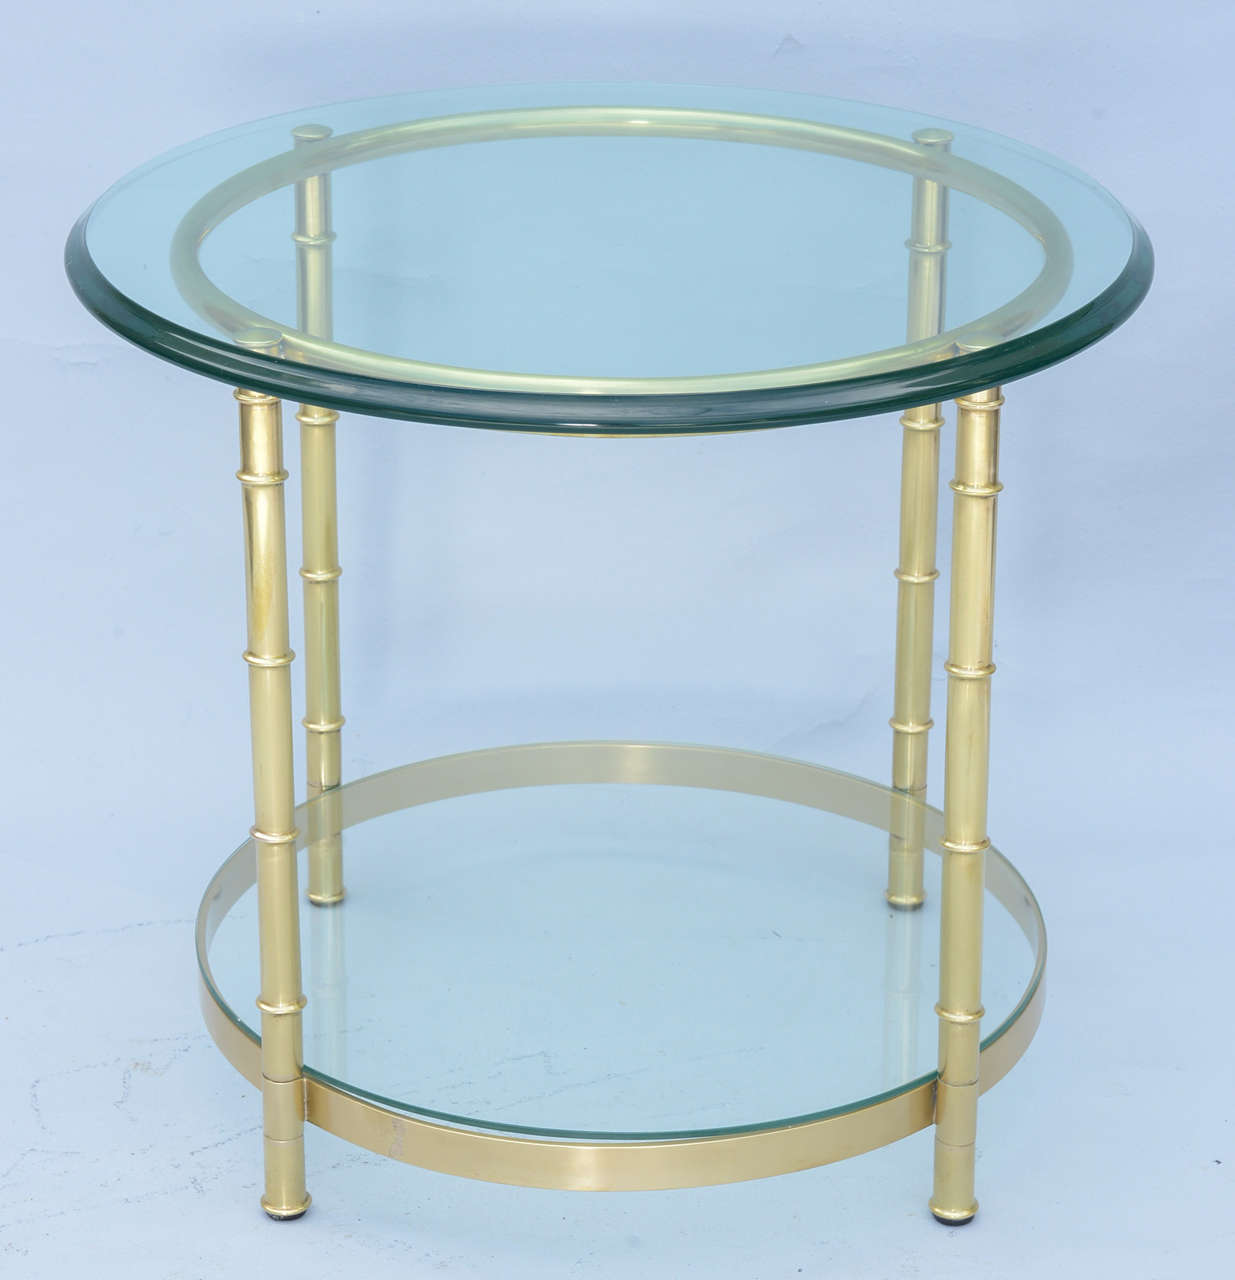 End or side table, of polished brass, its round glass top raised on faux bamboo legs, joined by ring apron and shelf-stretcher.

Stock ID: D7191